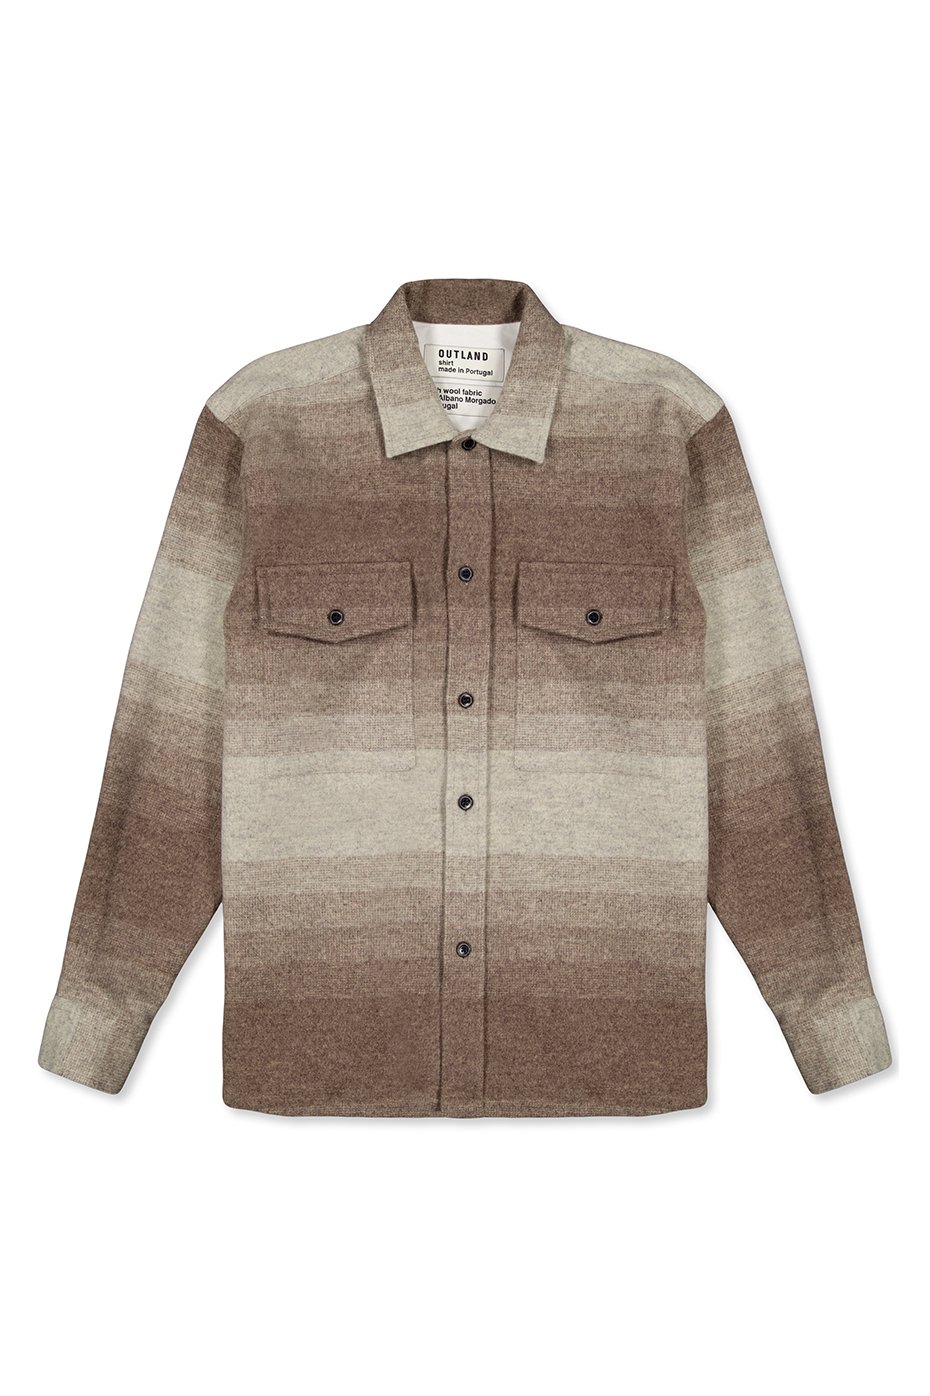 Outland Brown Stripe Army Overshirt